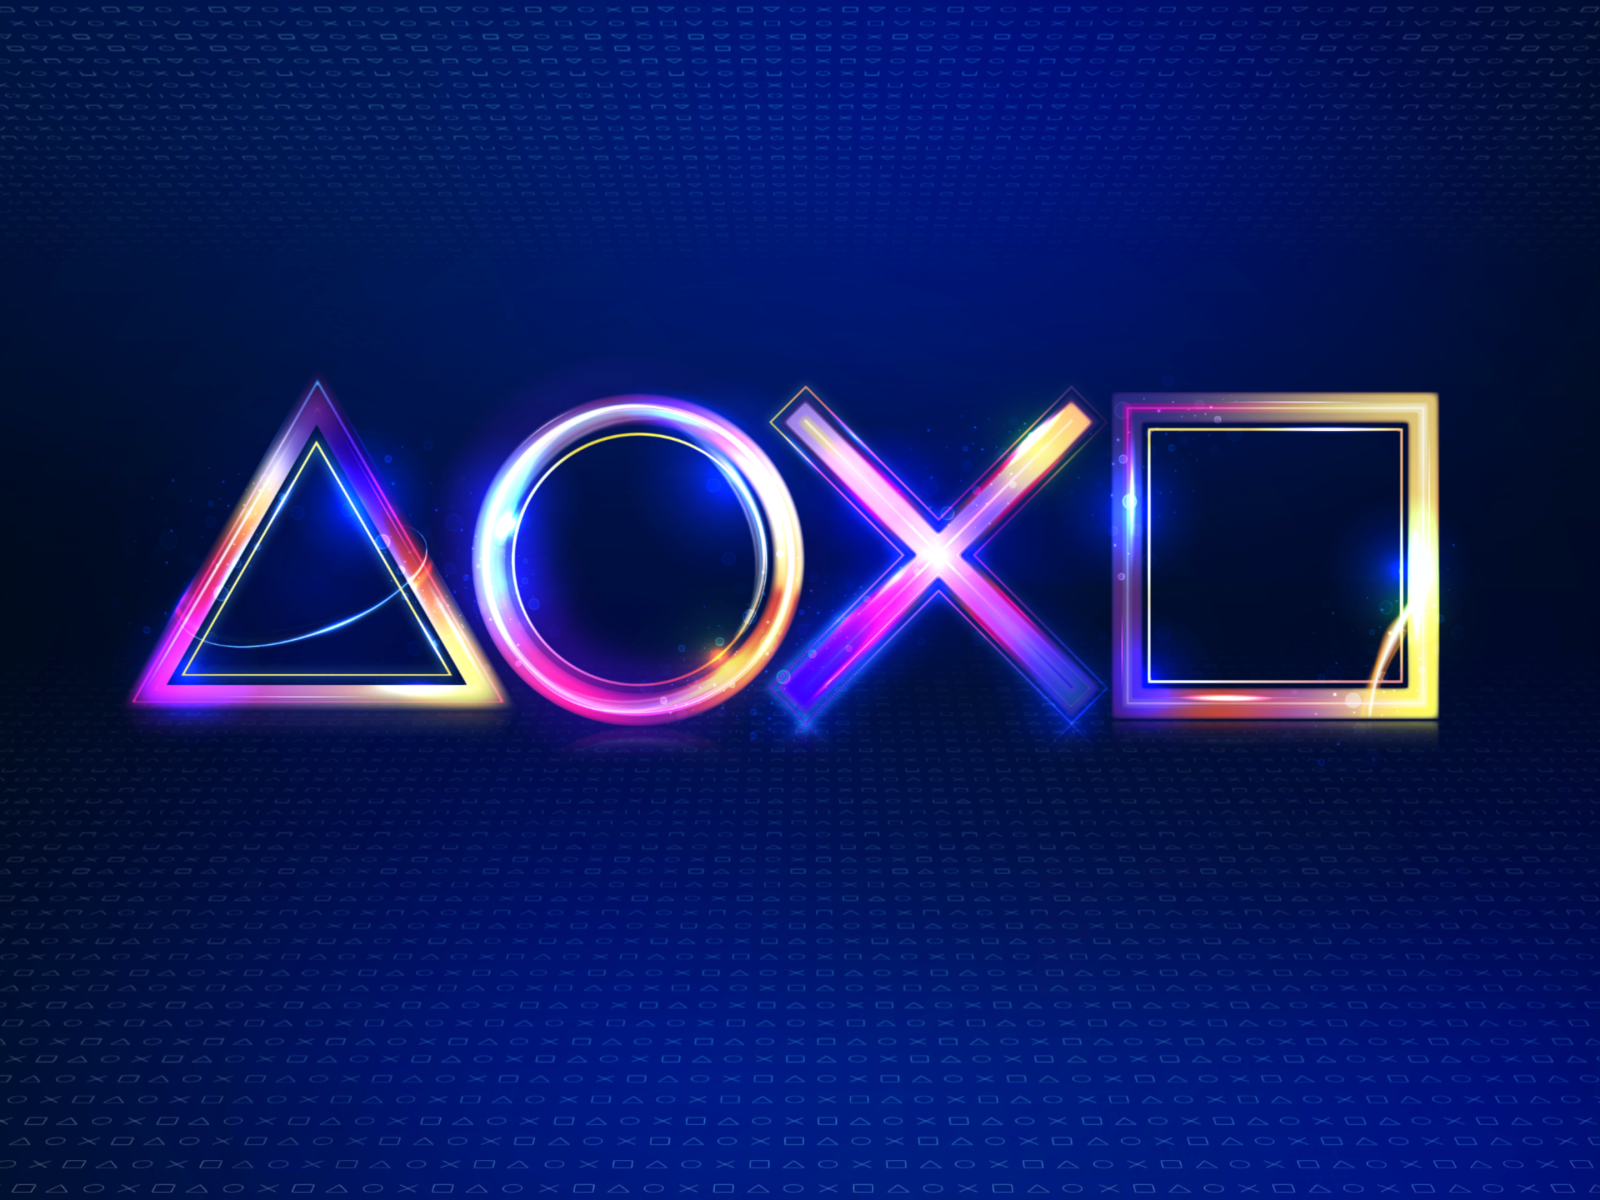 PlayStation neon signs on a blue background Desktop wallpaper 1600x1200